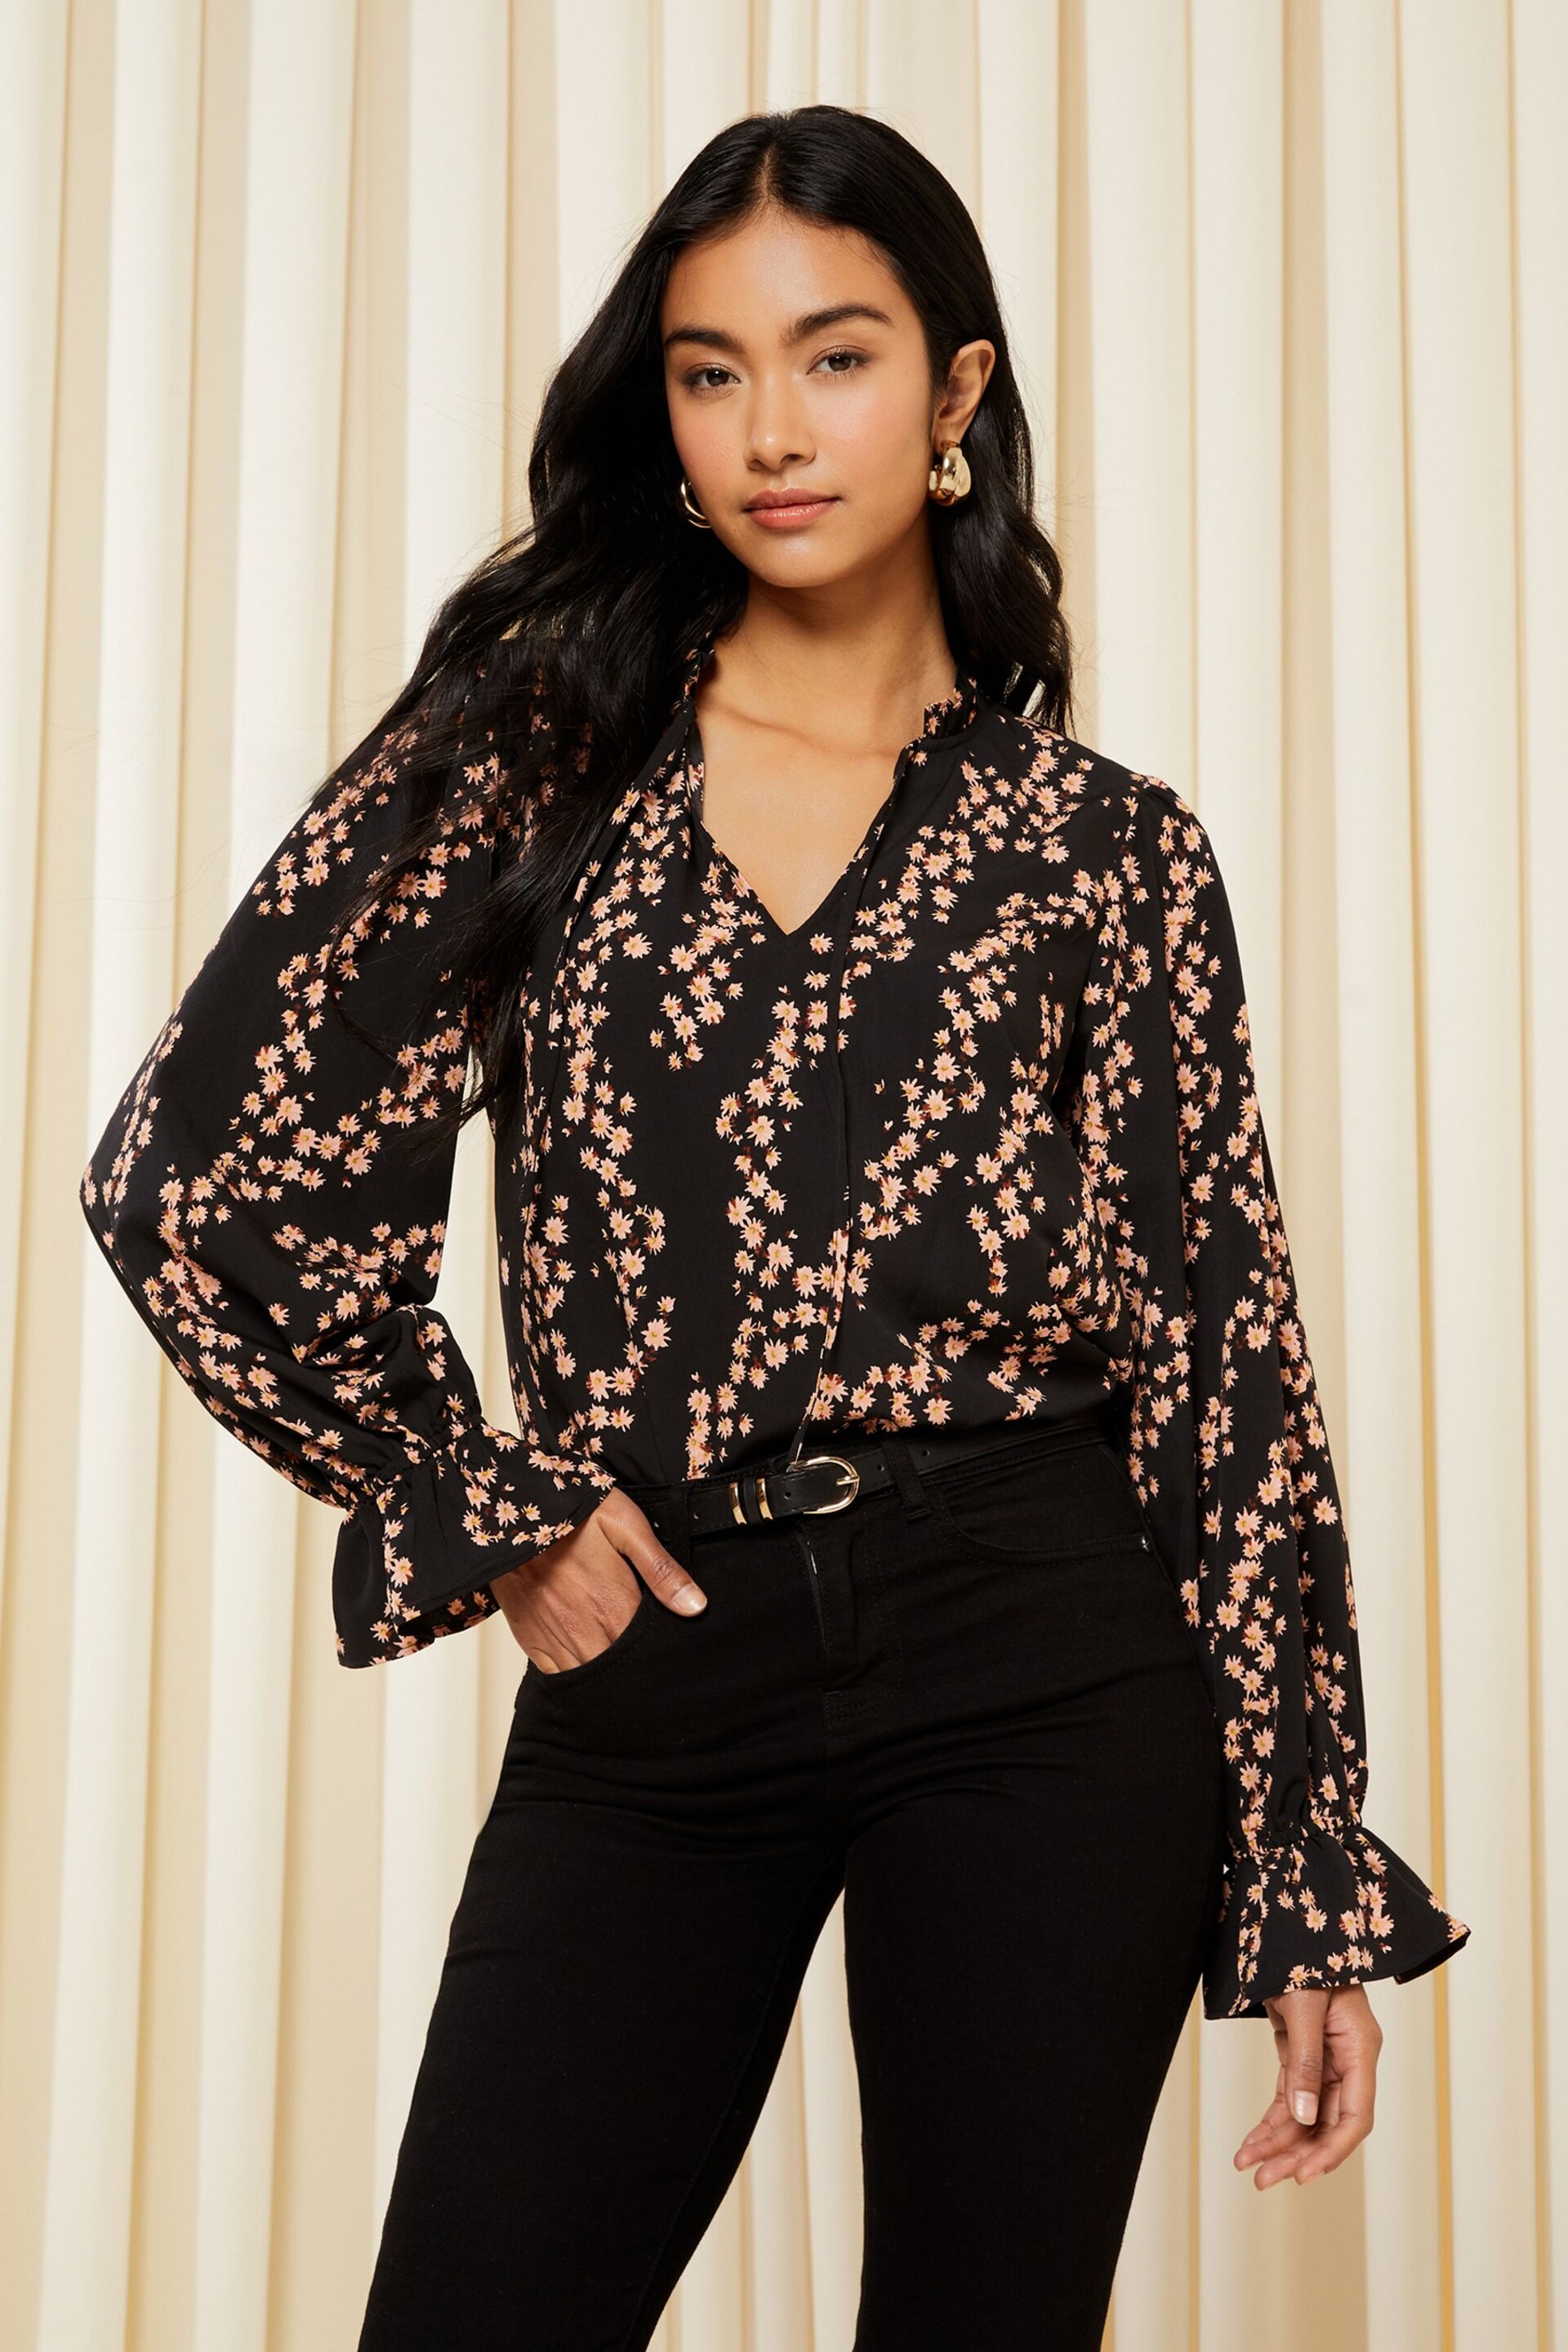 Friends Like These Black Floral Long Sleeve Tie Neck Blouse - Image 1 of 4